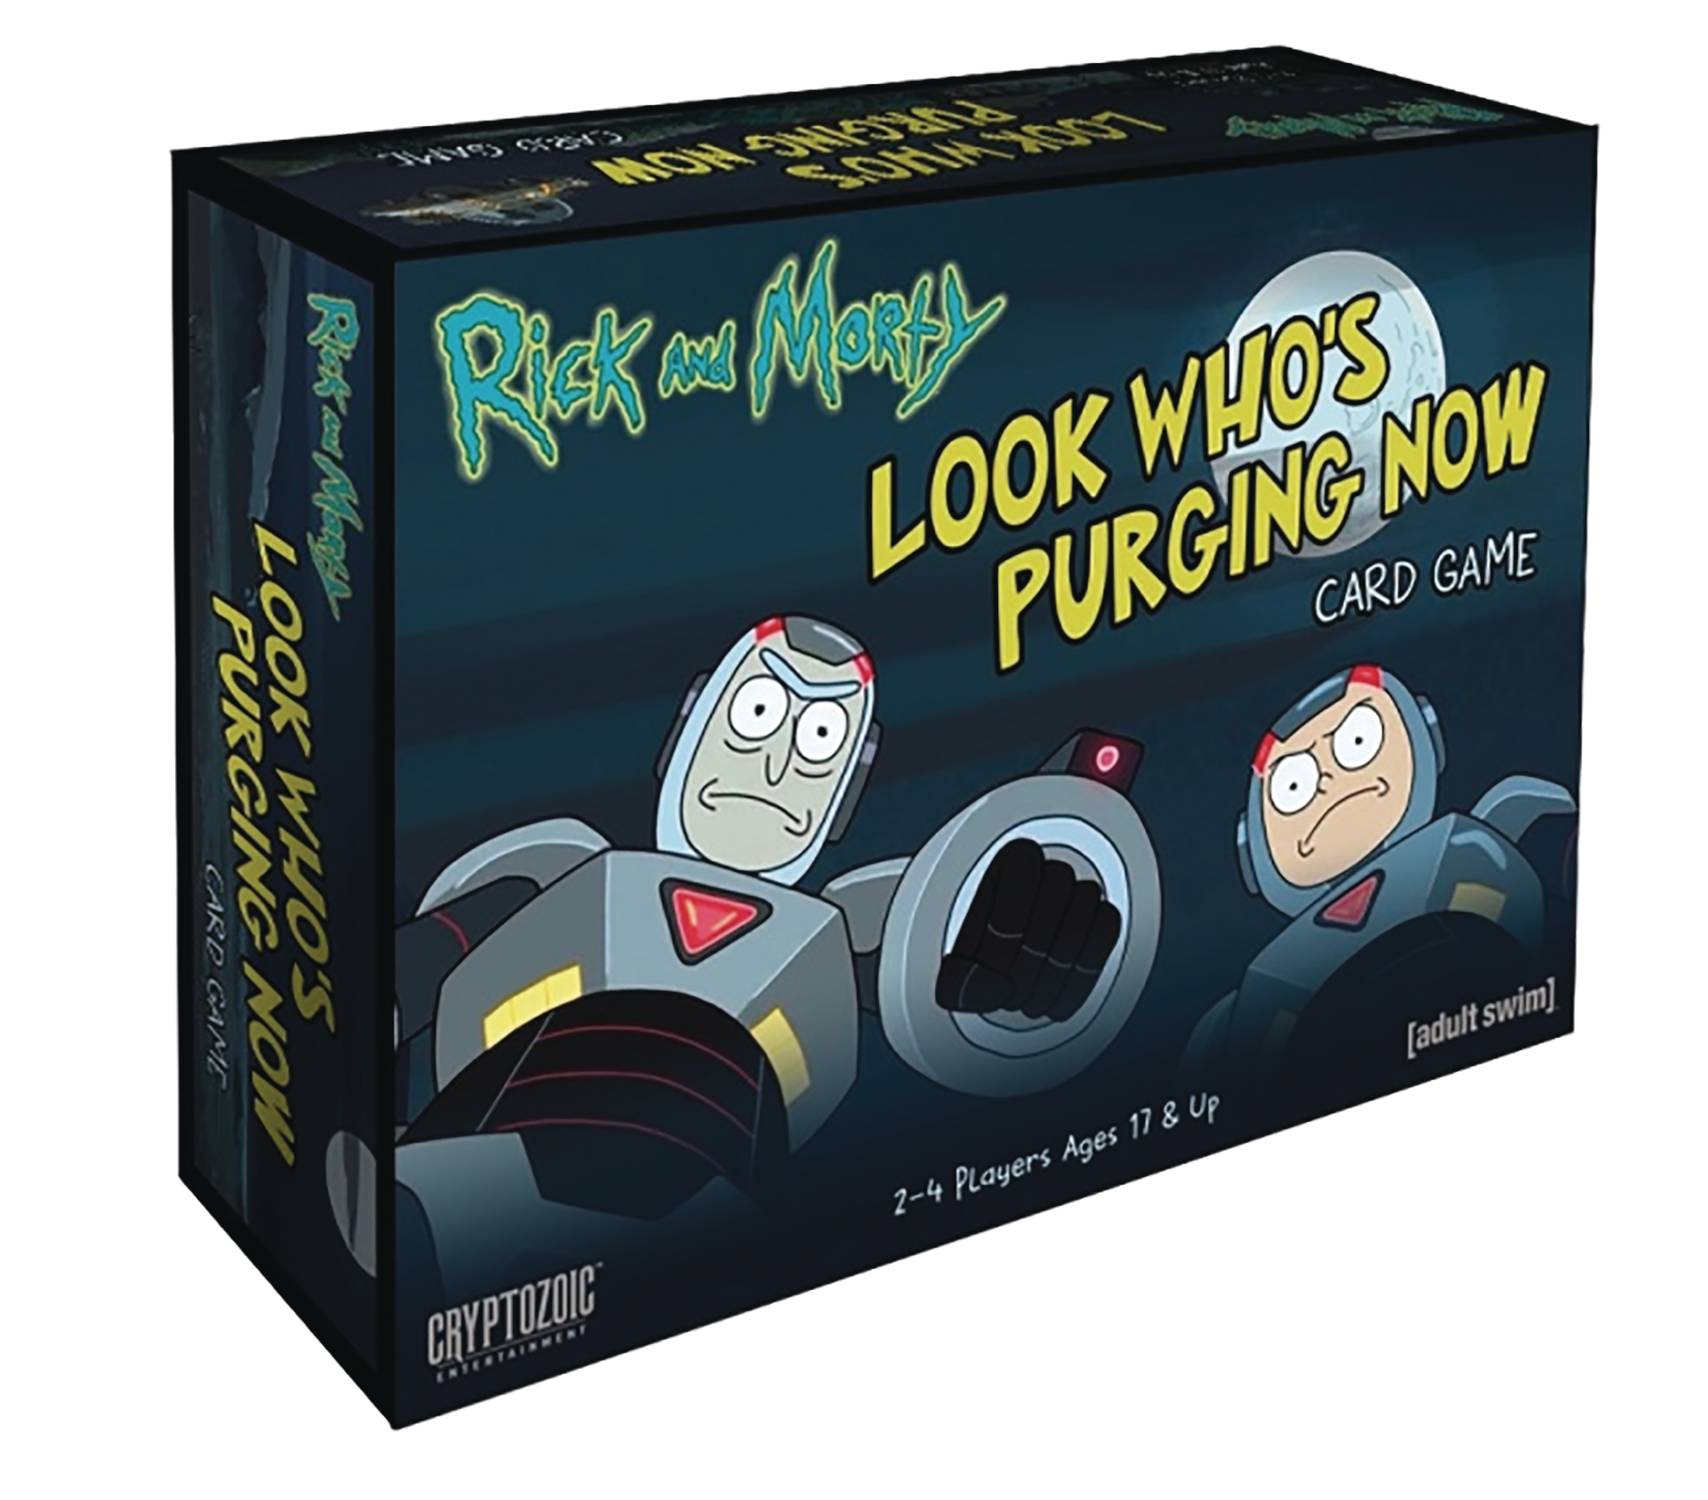 RICK & MORTY LOOK WHOS PURGING NOW CARD GAME